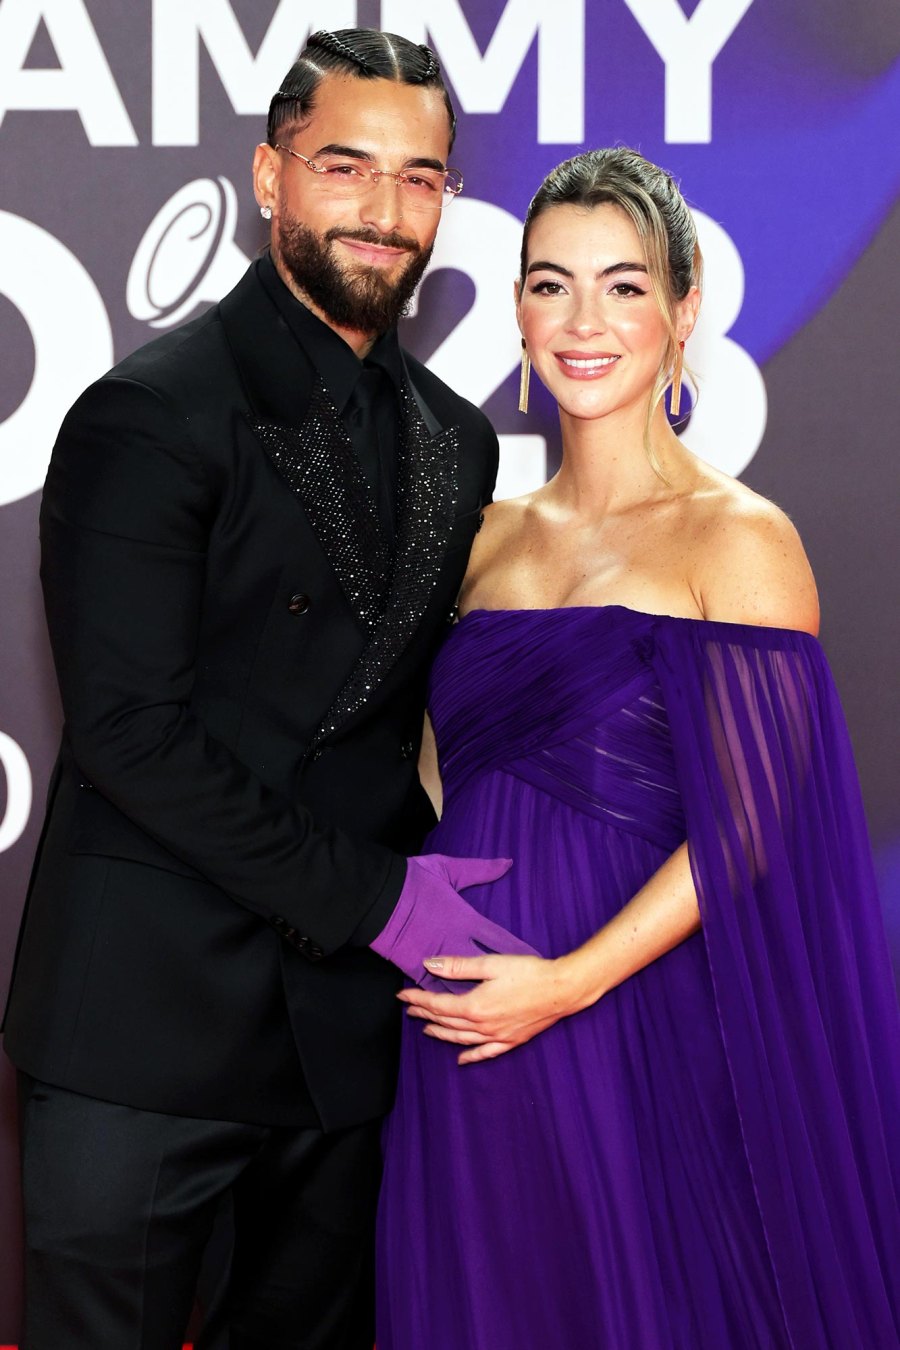 <p>The singer announced that he and Gomez welcomed their first baby together in a post via <a href="https://www.instagram.com/p/C4V6EhhutA9/?hl=en&img_index=1" rel="noopener">Instagram</a>. “On March 9th at 8:23 A.M. the love of our lives Paris Londoño Gomez was born,” he wrote in Spanish. “Thank you all for your birthday messages and well wishes. Susana.. Love: Thank you for fulfilling my biggest dream of being a Father, I will never forget that moment. I love them </p>